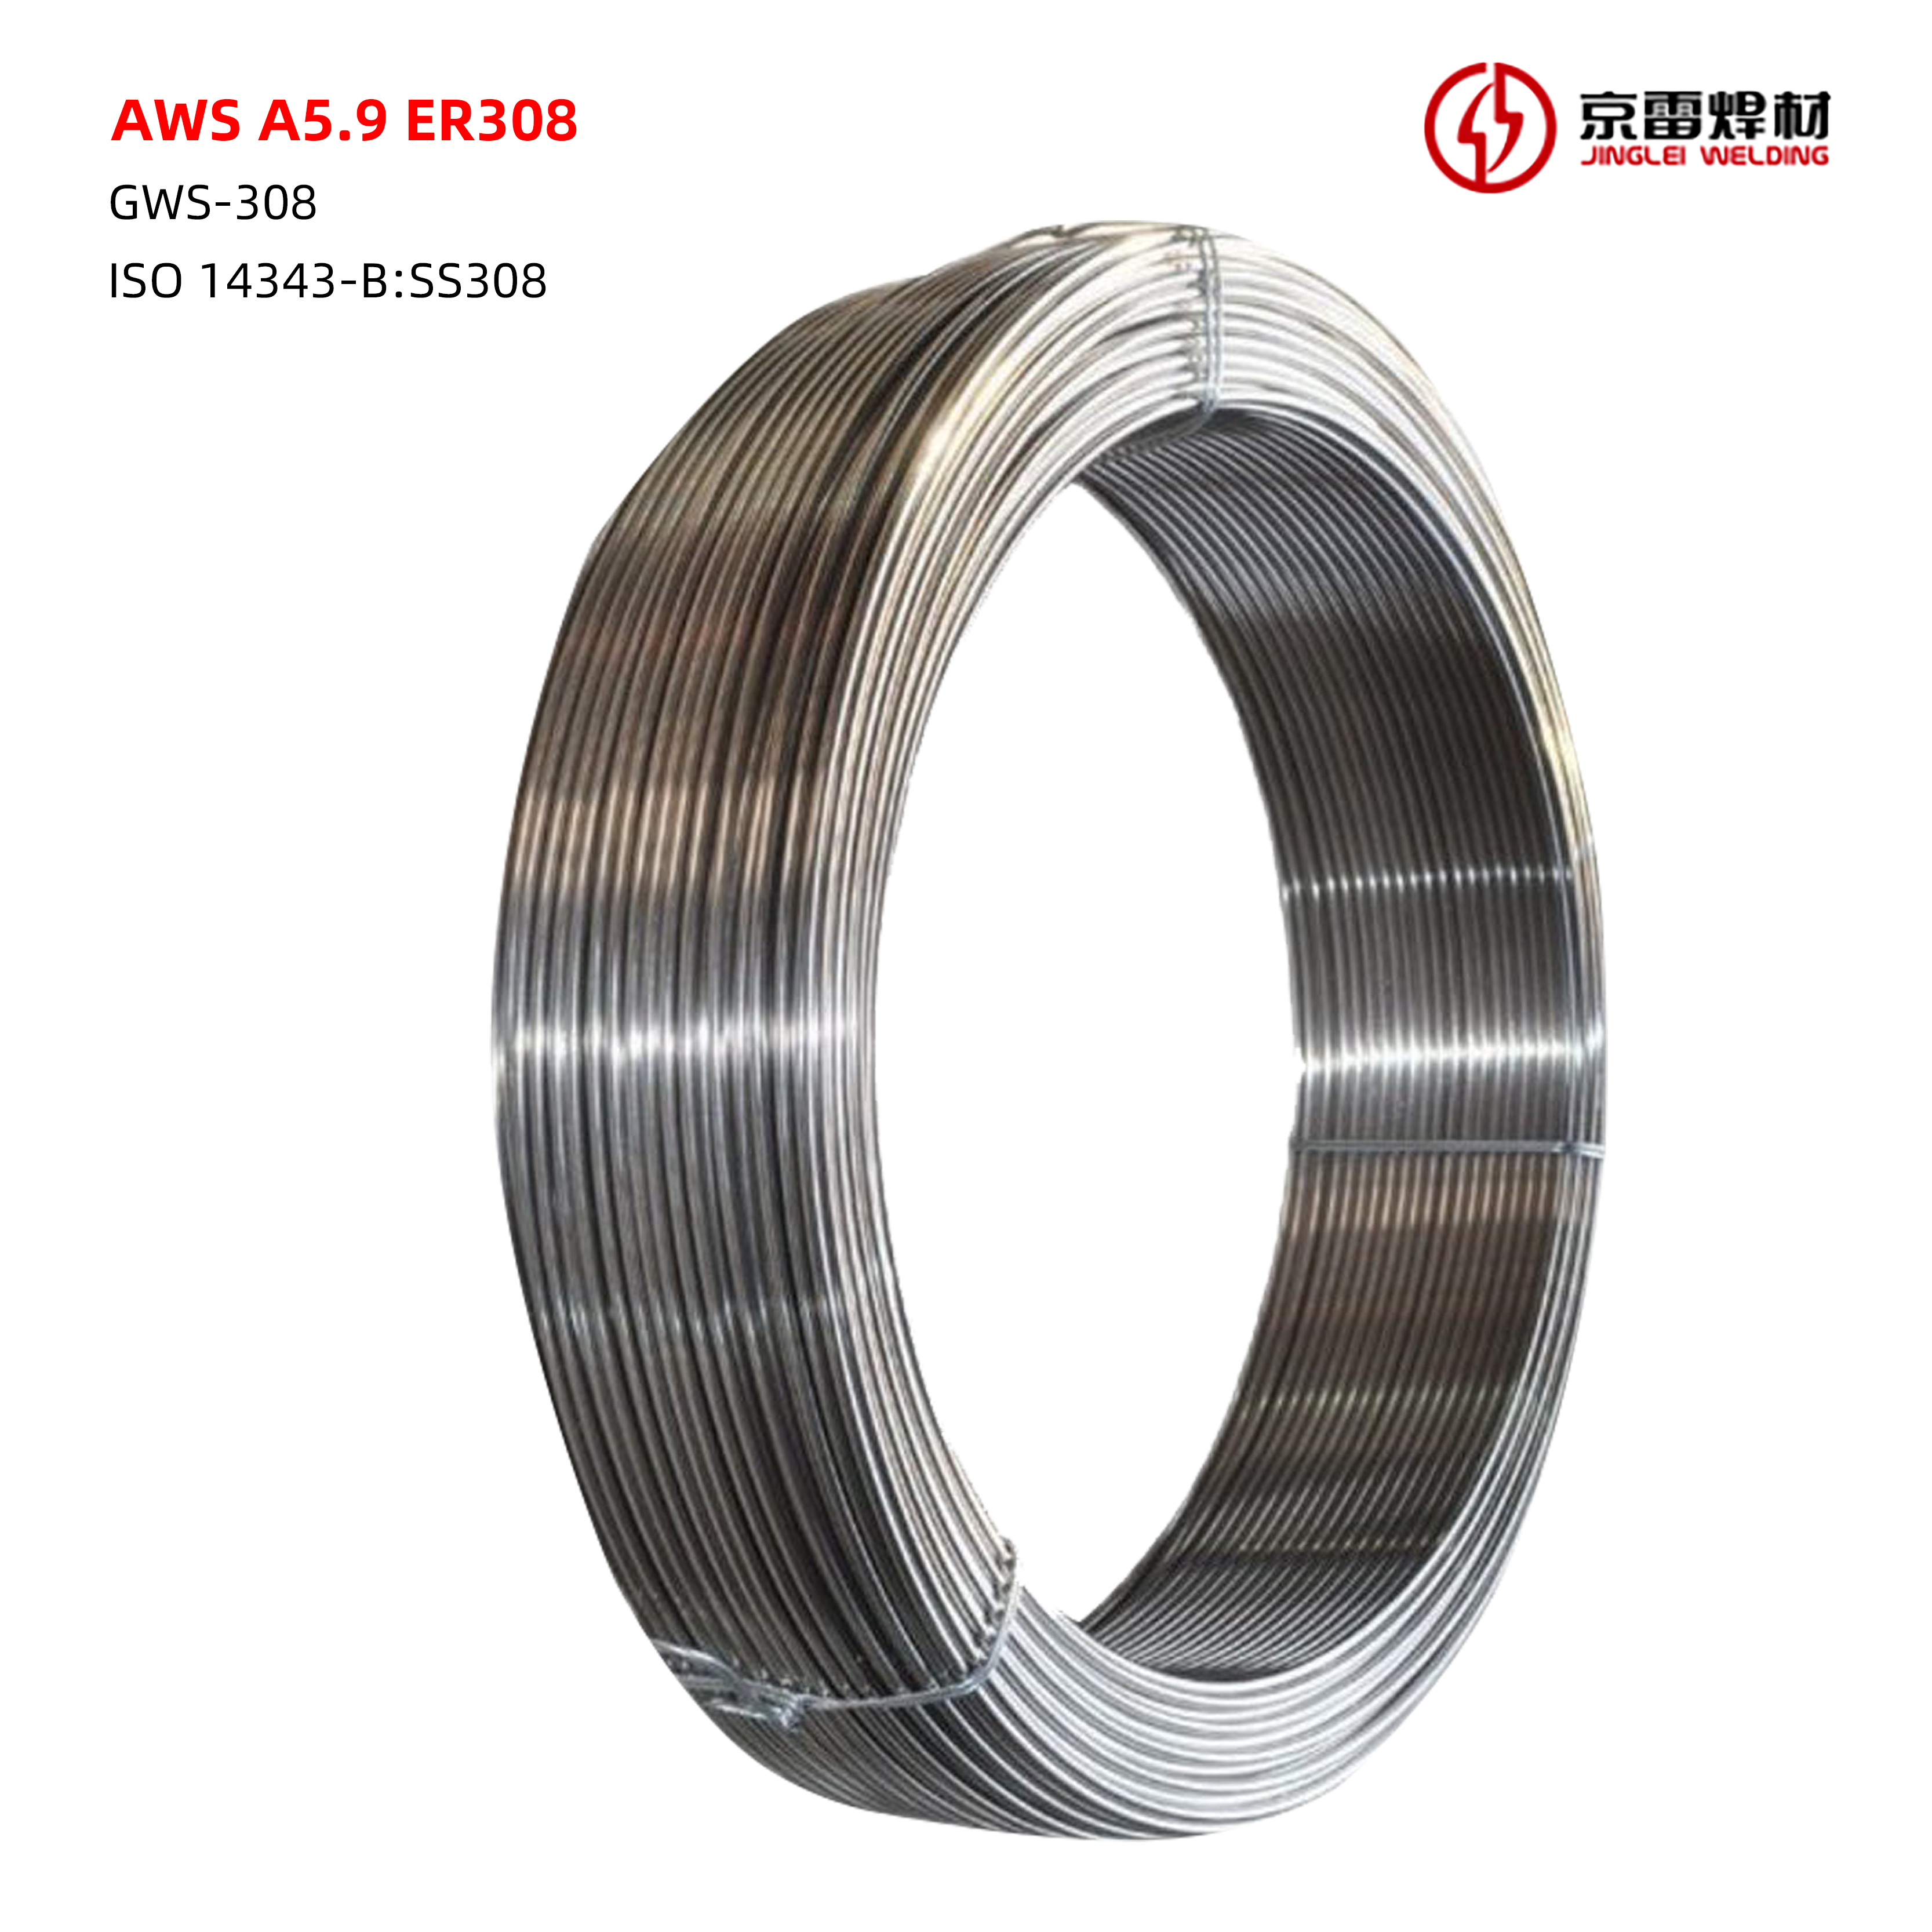 Stainless steels SAW welding wire ER308 and flux Welding materials